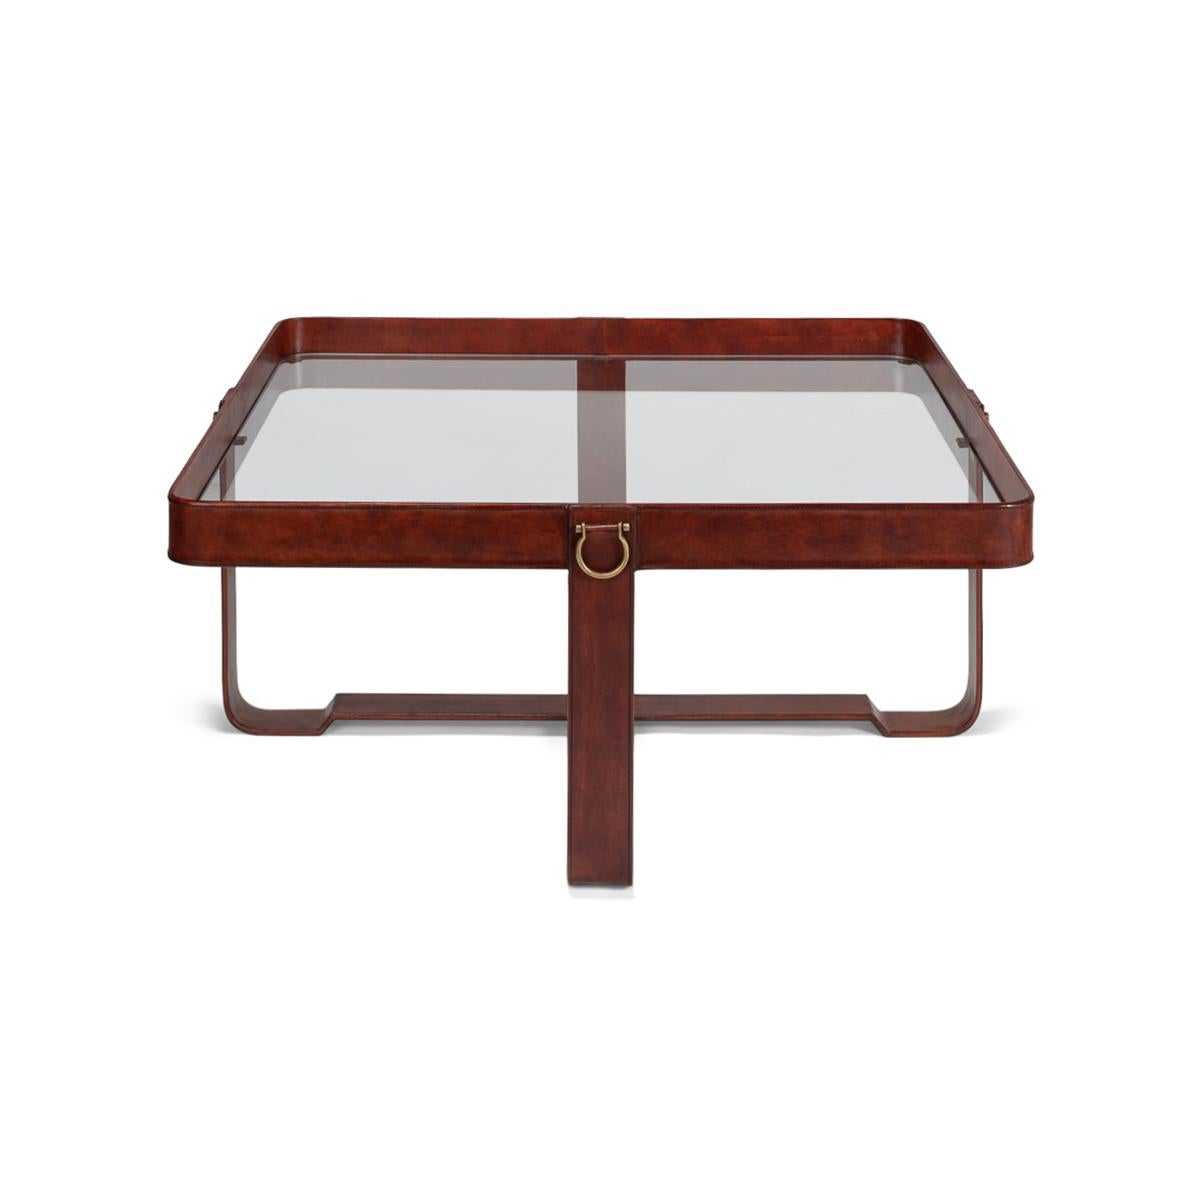 With an inset glass top and a brown leather-wrapped frame and base.

Dimensions: 40